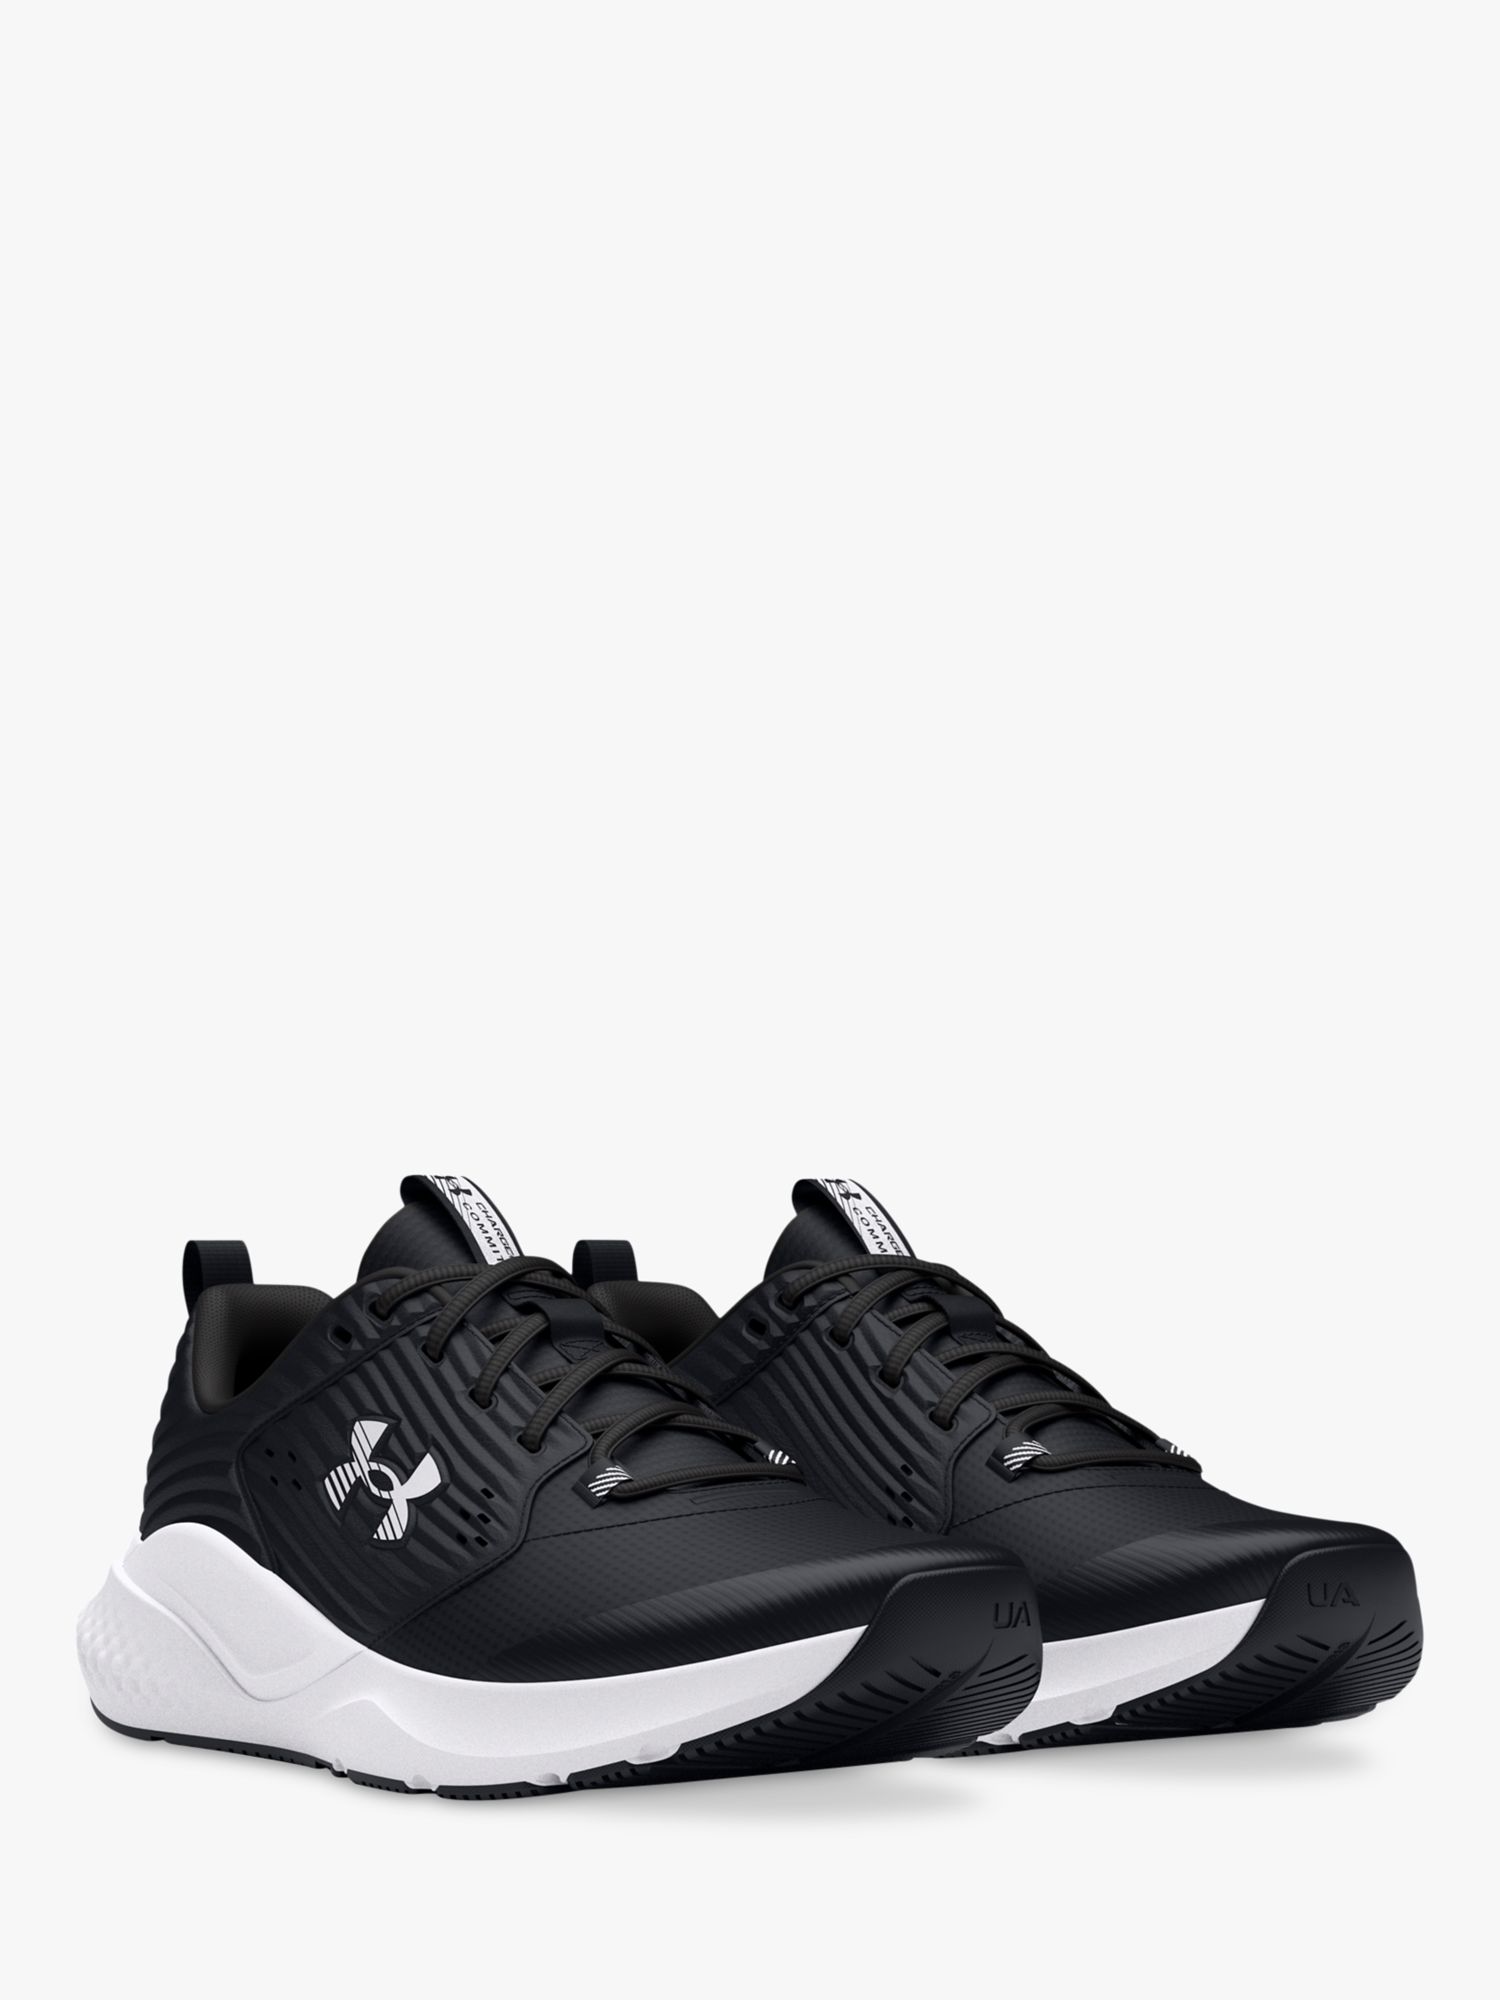 Under Armour Charged Men's Running Shoes, Black/White, 9